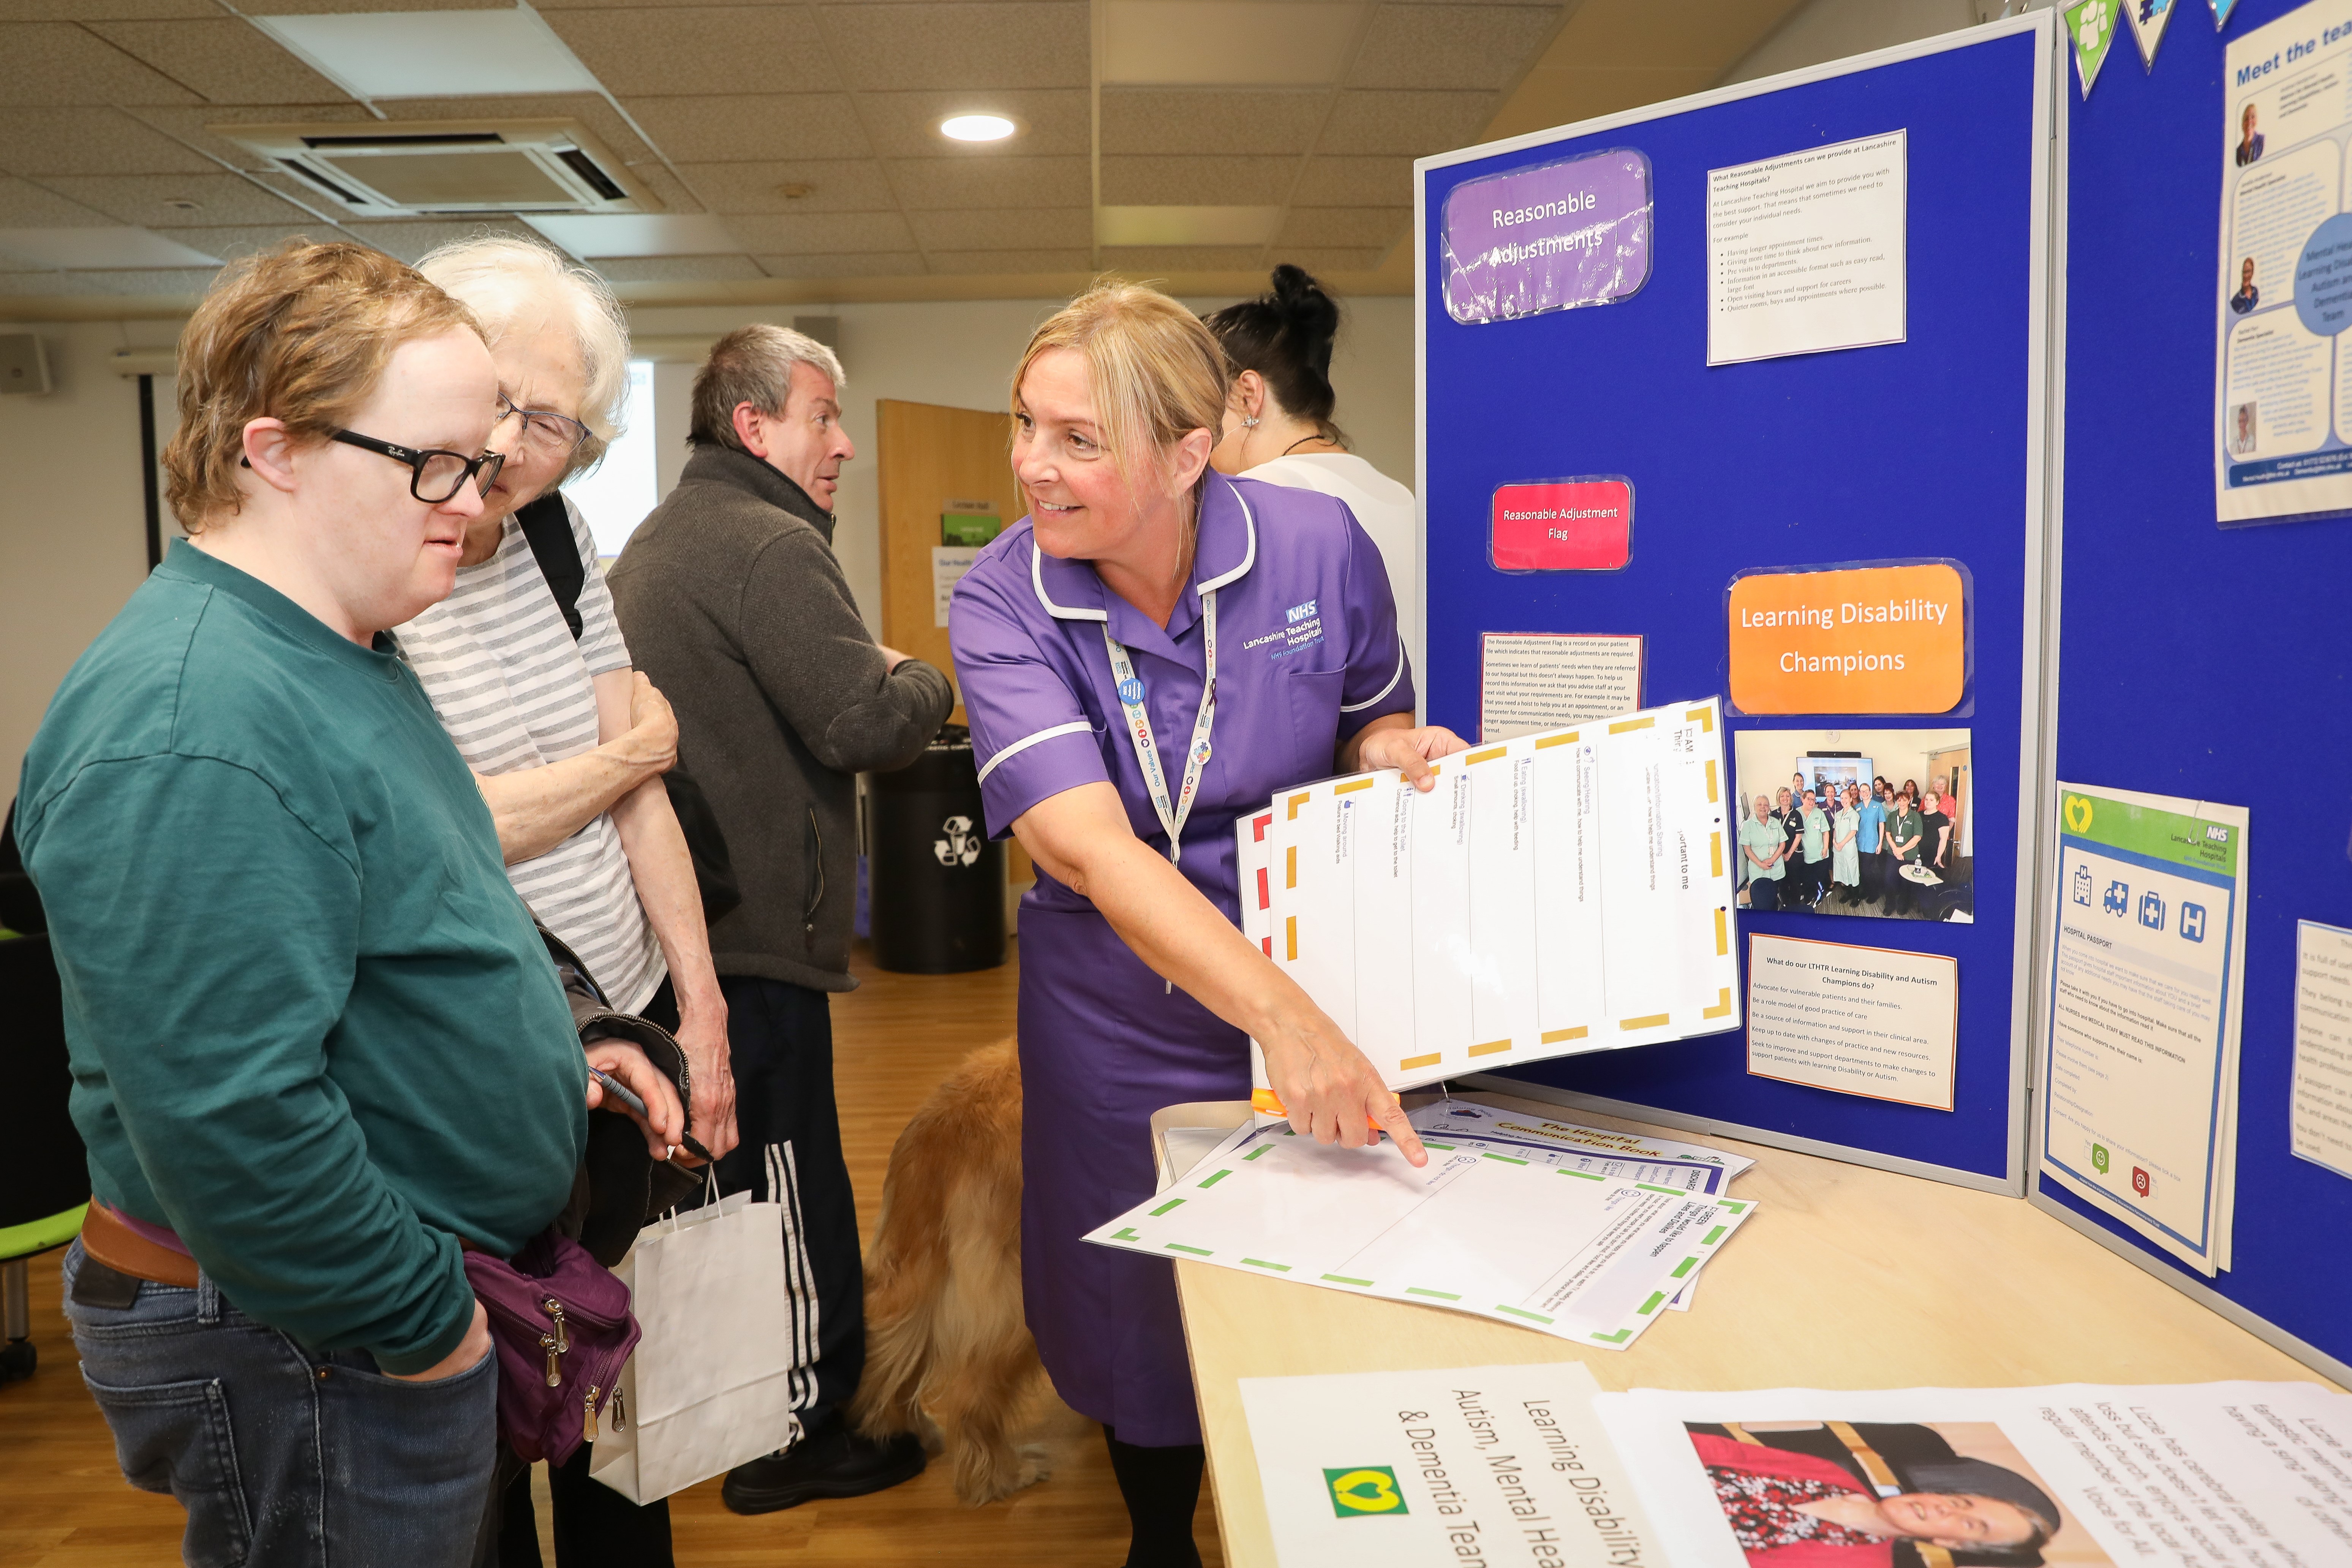 NHS staff member showcasing information to patients and visitors